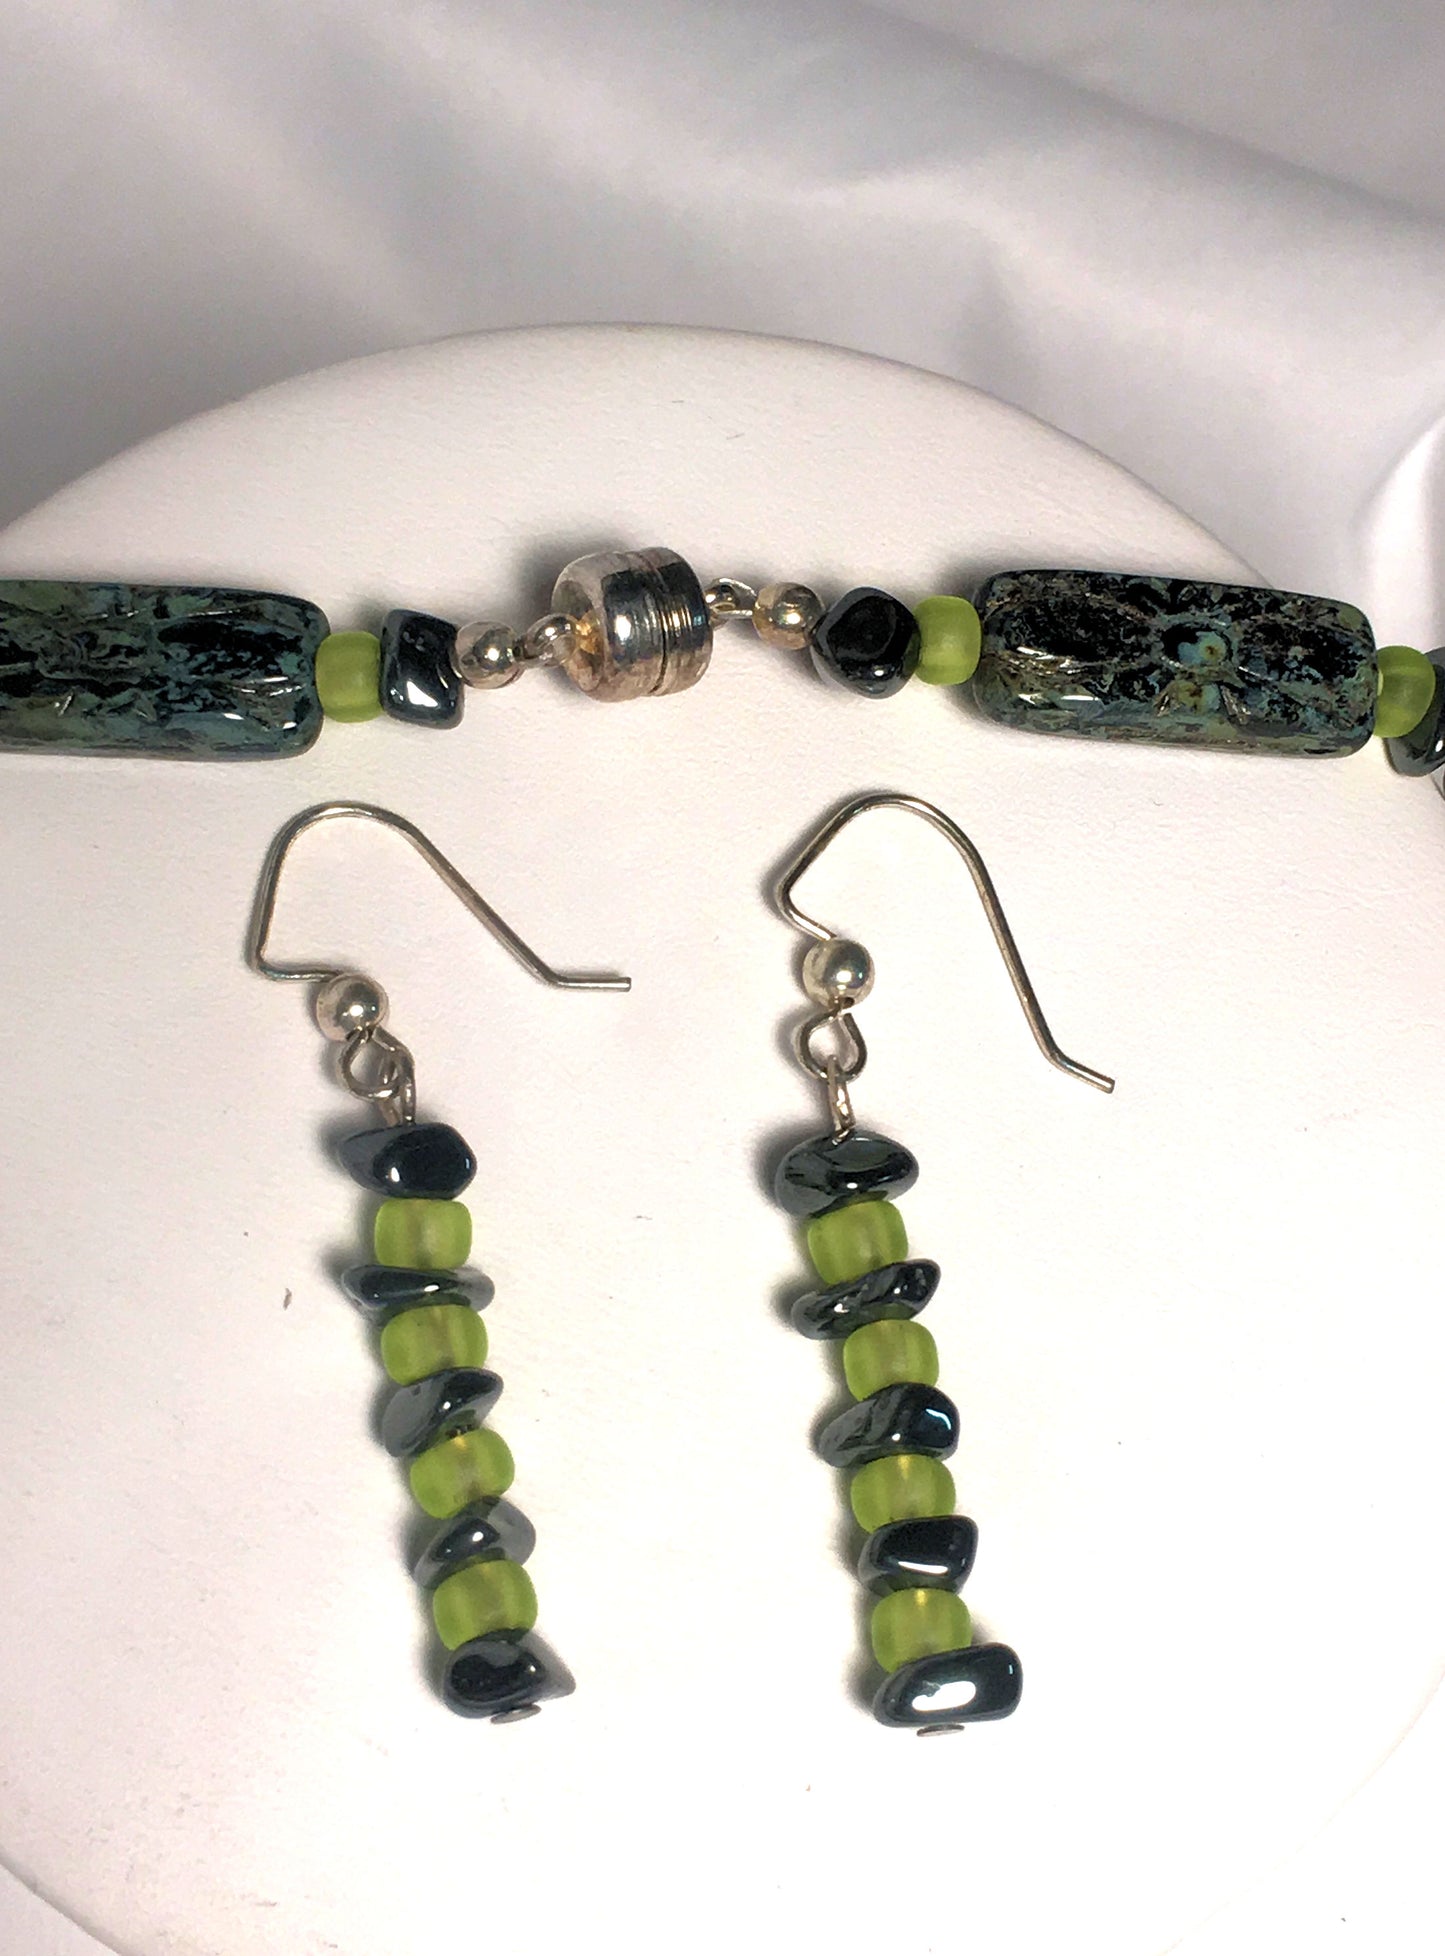 Czech Black/Green Pressed Flower Beads and Hematite Chip Necklace and Earring Set